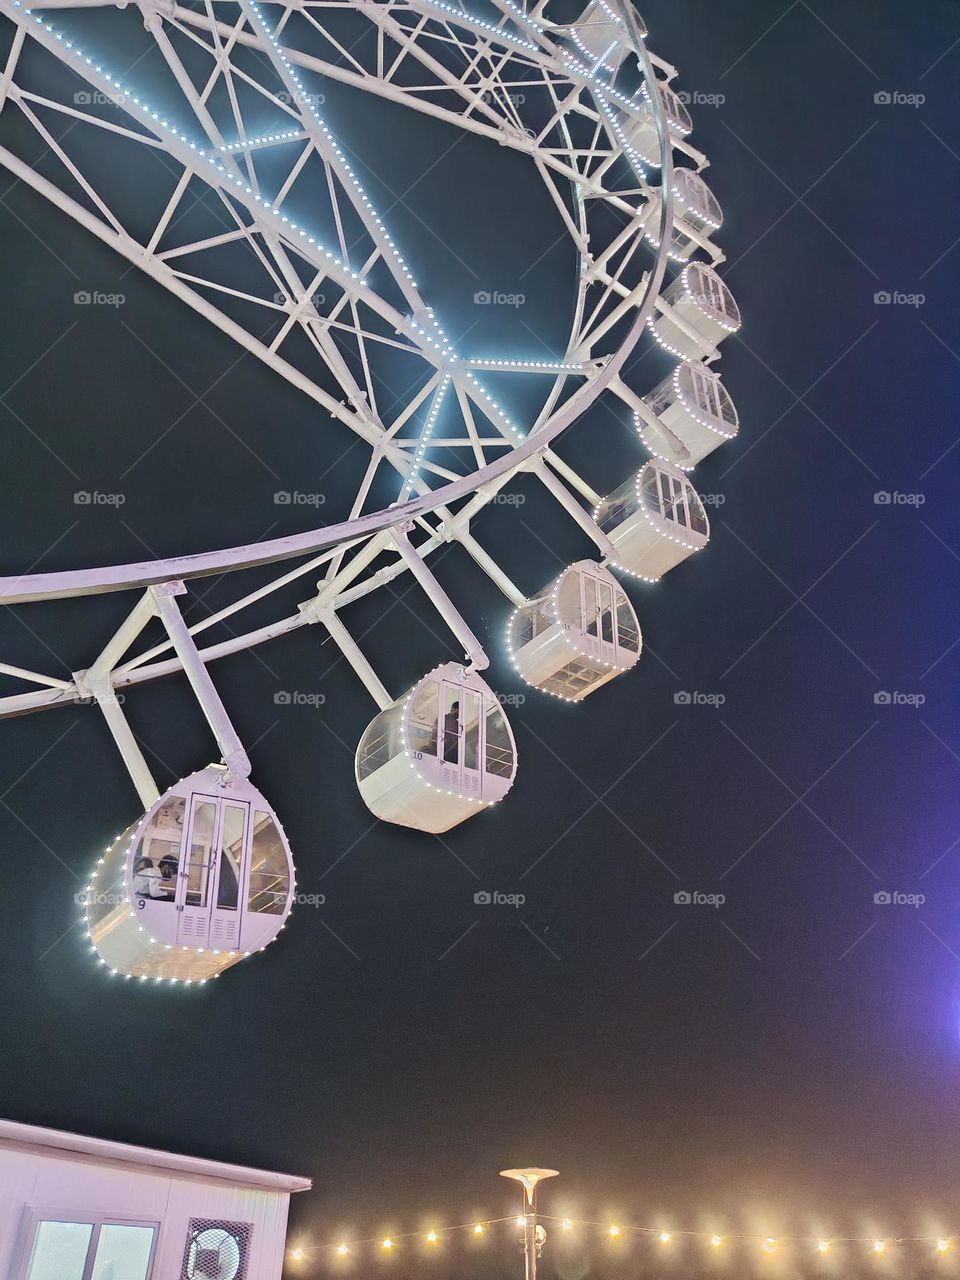 Romantic Perris wheel with lovers inside. It has white geometric figures with dark background. The lights give it a modern and classy look. The cabins are pear shaped.